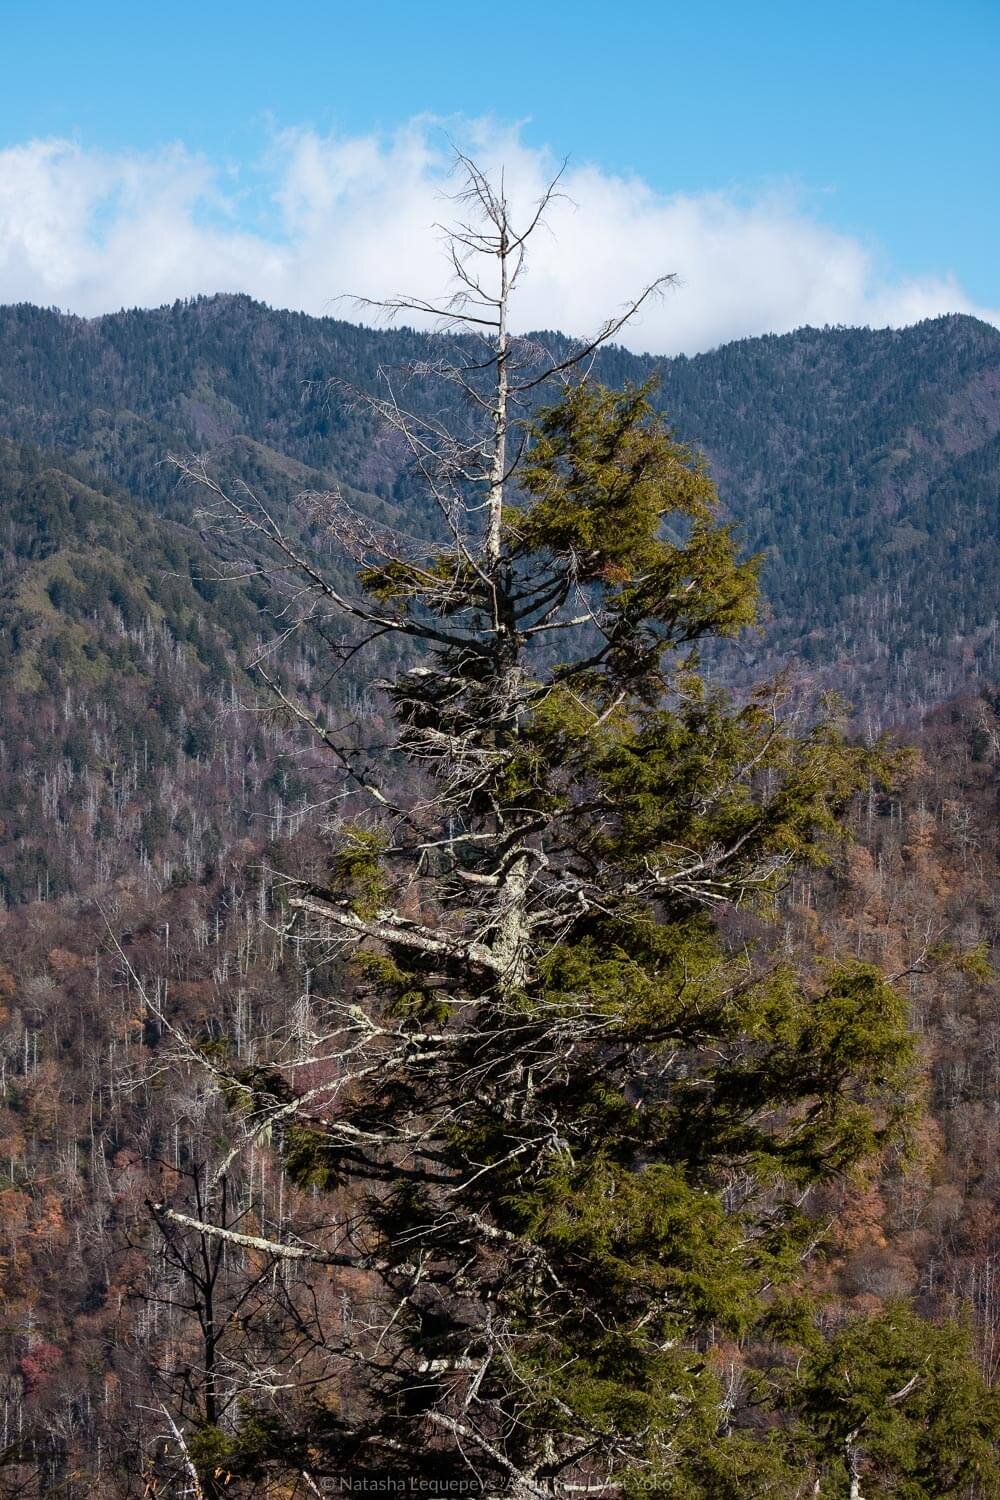 Chimney Top trail, The Great Smoky Mountains. Travel photography and guide by © Natasha Lequepeys for "And Then I Met Yoko". #smokymountains #usa #travelblog #travelphotography